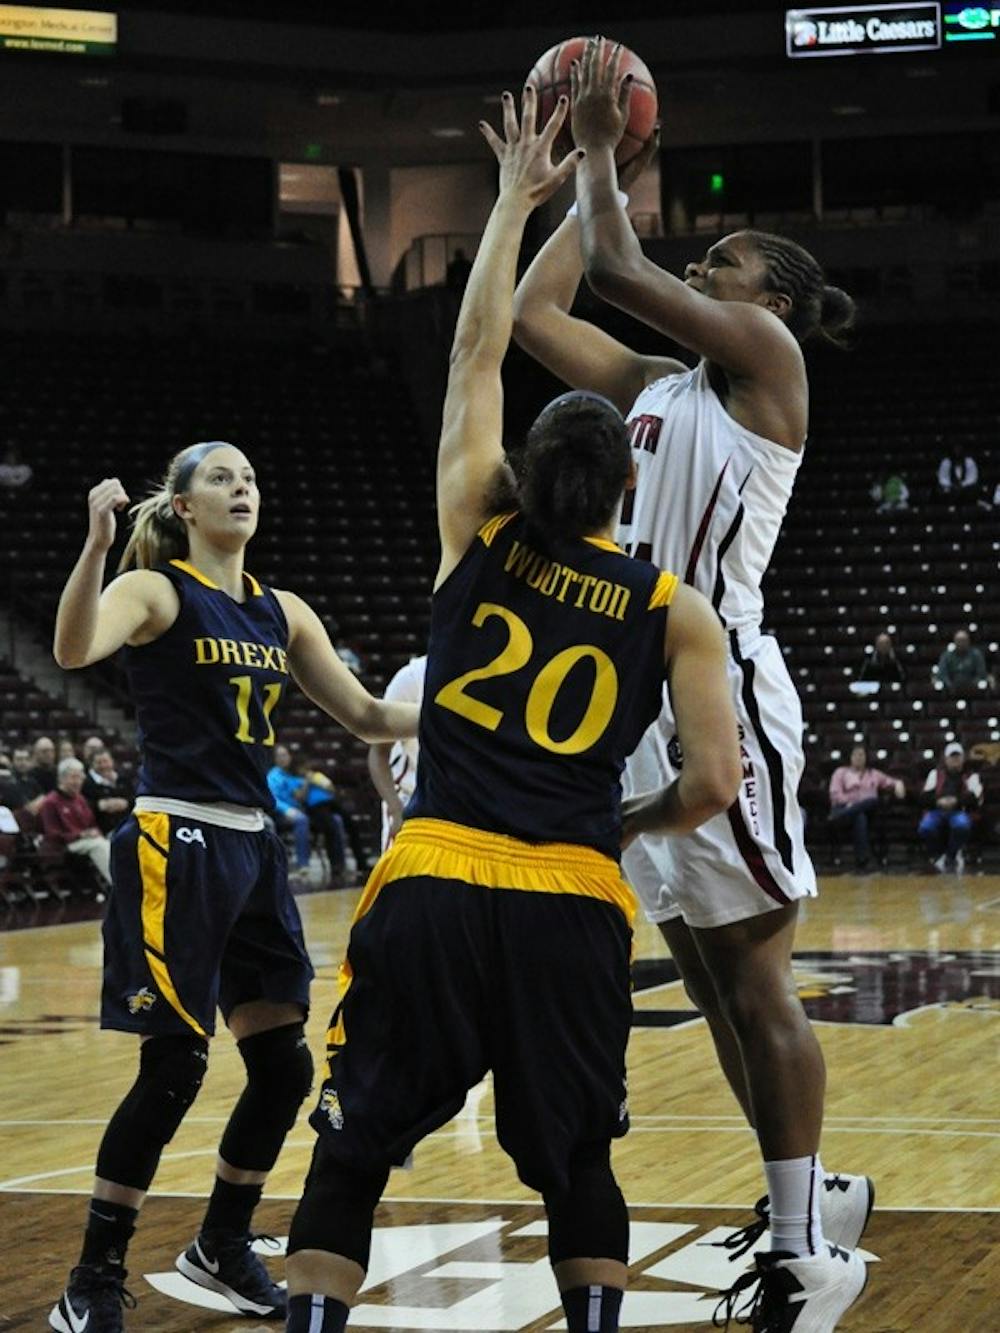 Senior forward Ashley Bruner did not have a point in the first half, but she finished the game with 12.